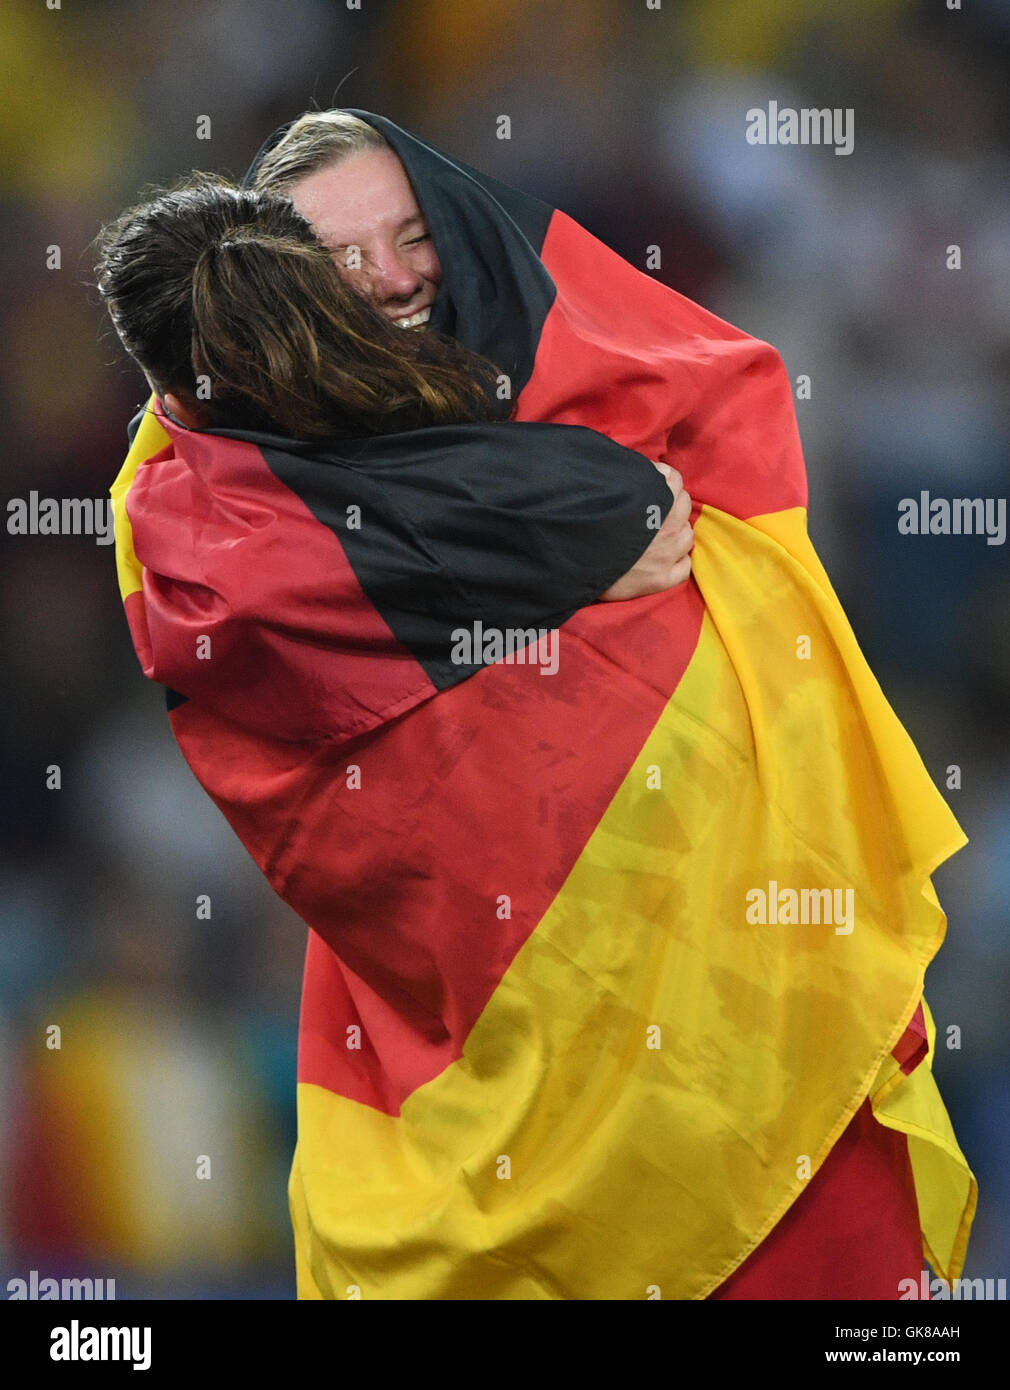 Rio de Janeiro, Brazil. 19th Aug, 2016. Alexandra Popp (R) of Germany celebrate after winning the Women's soccer Gold Medal Match between Sweden and Germany during the Rio 2016 Olympic Games at the Maracana in Rio de Janeiro, Brazil, 19 August 2016. Photo: Soeren Stache/dpa/Alamy Live News Stock Photo